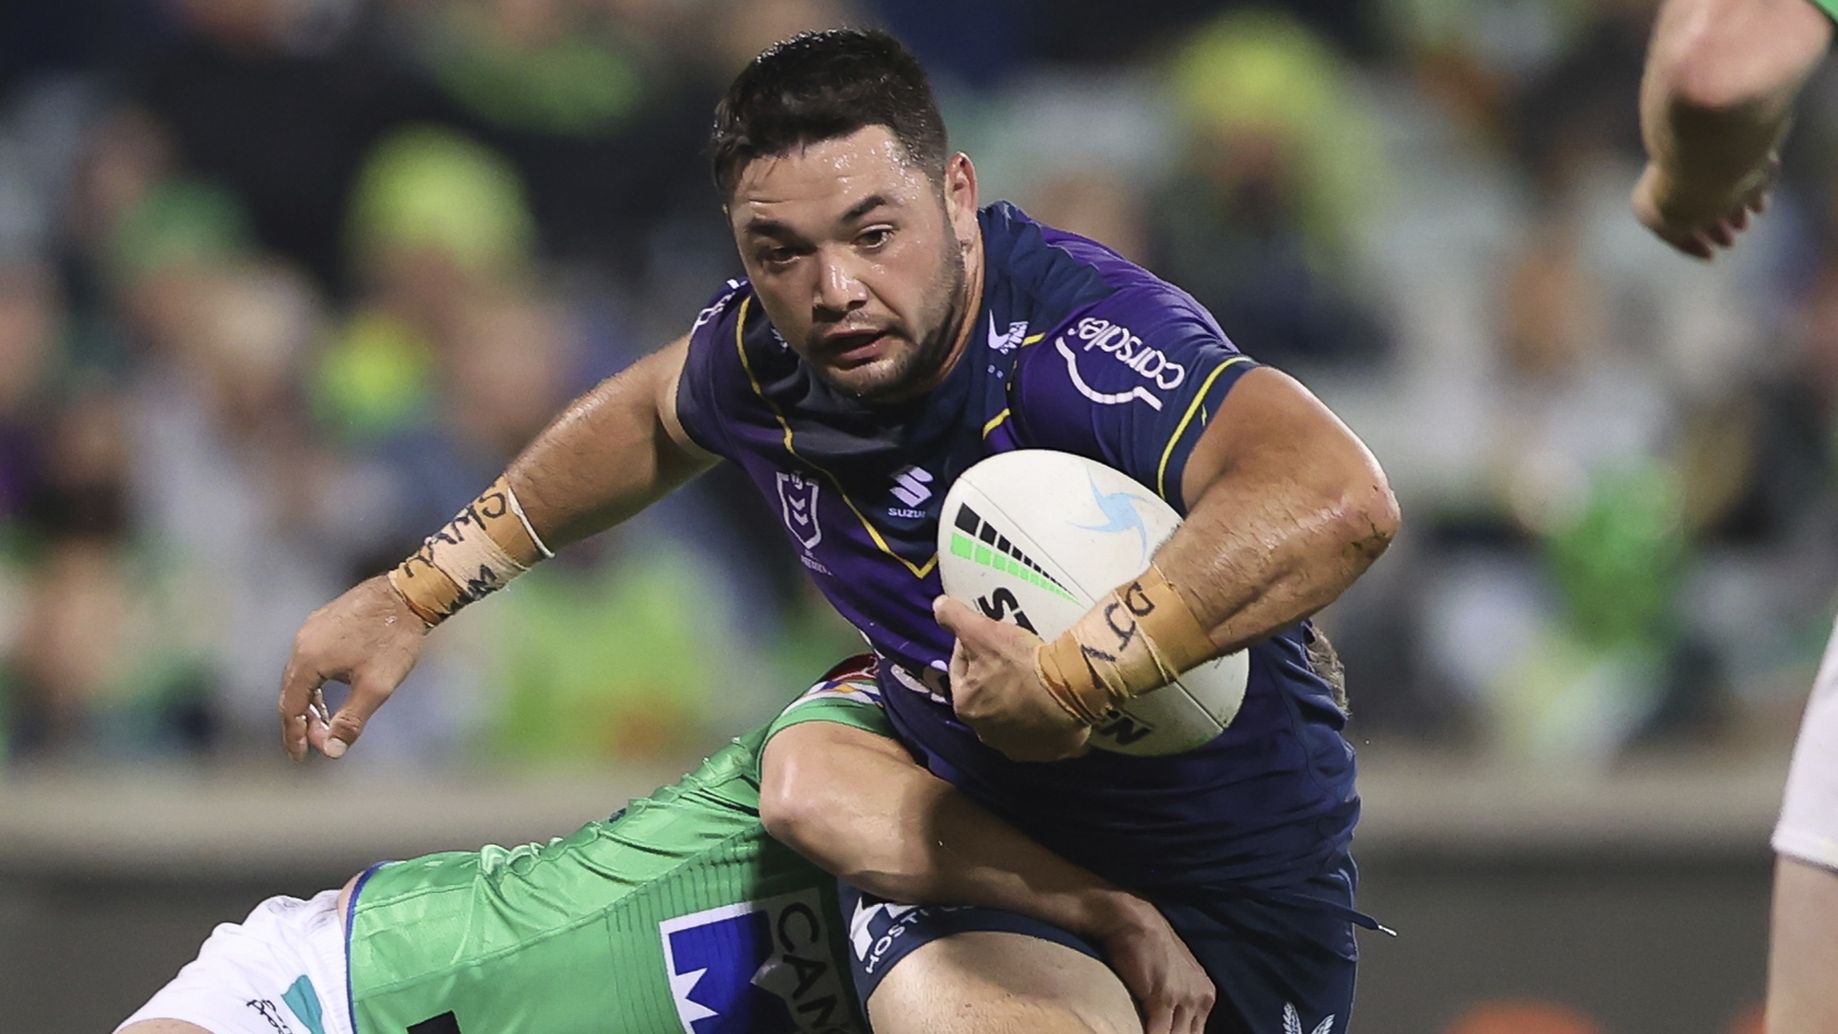 The options facing Brandon Smith as time at Melbourne Storm looks to be 'untenable'